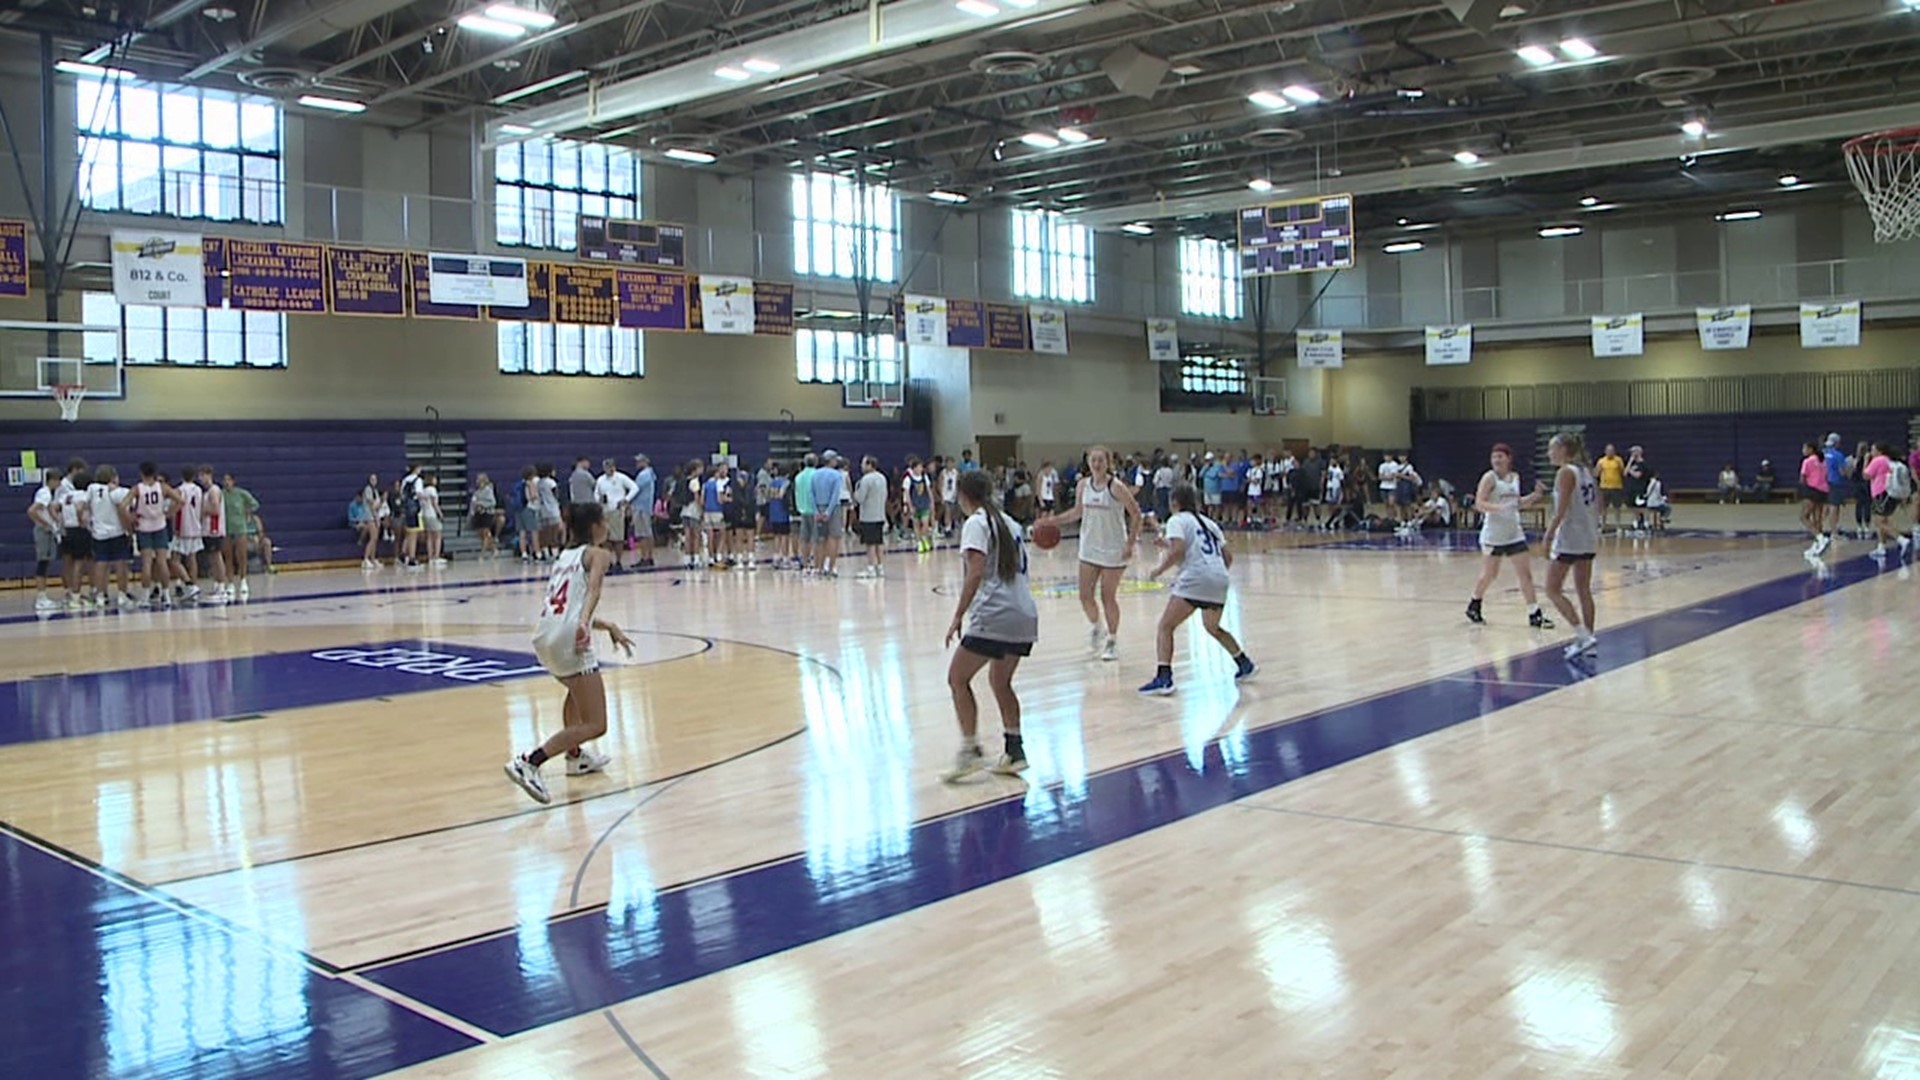 A memorial basketball tournament to honor a former student took place in Scranton Saturday.